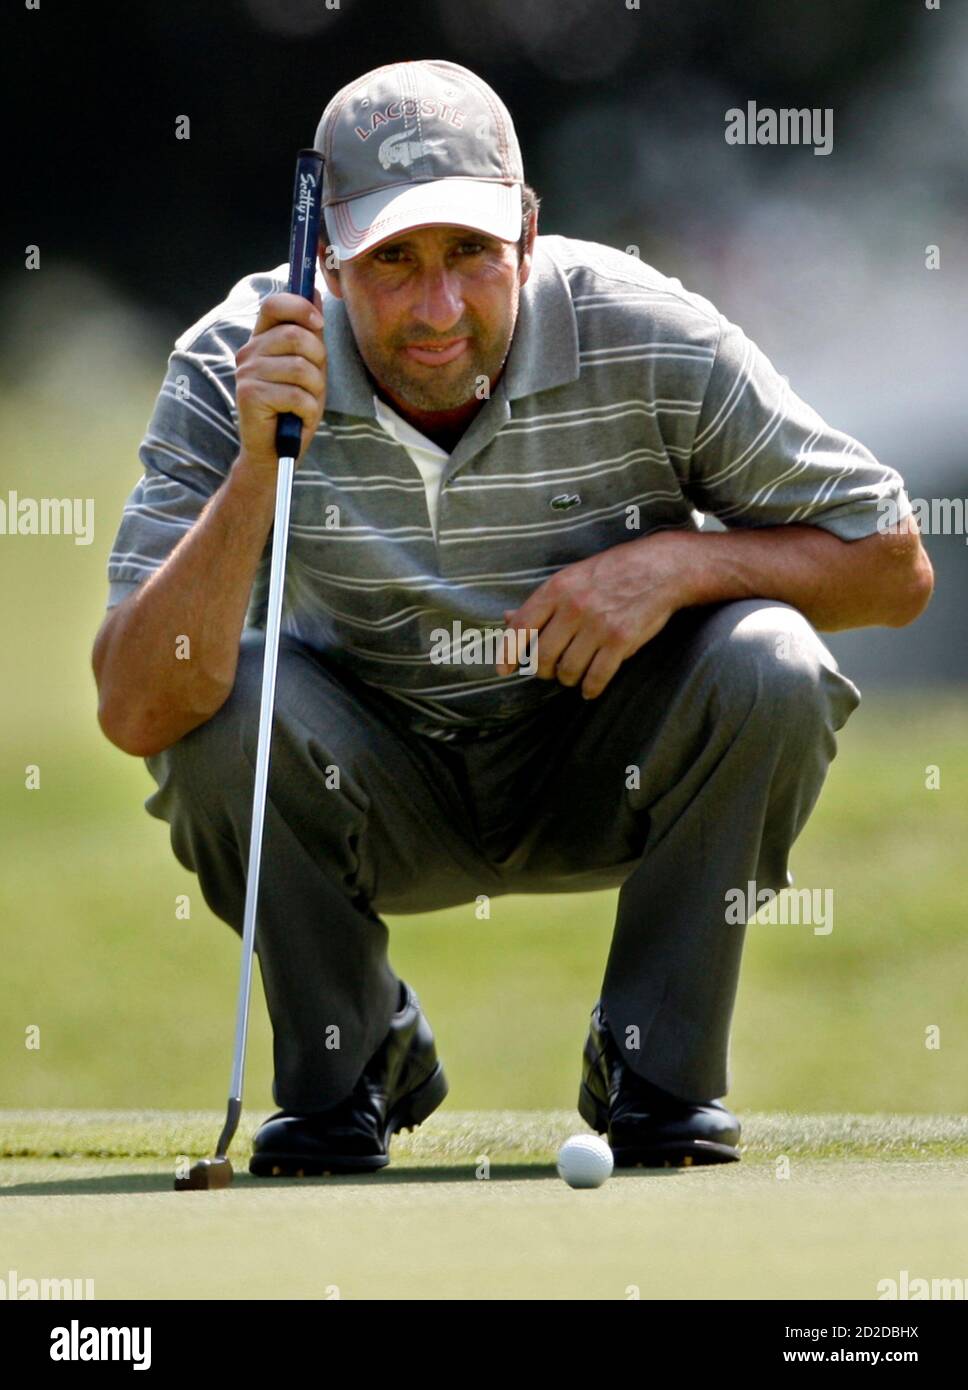 Jose Marie Olazabal of Spain takes a look at his putt on the second green during the third round of the St. Jude Classic golf tournament at TPC Southwind in Memphis, Tennessee June 13, 2009.   REUTERS/Nikki Boertman    (UNITED STATES SPORT GOLF) Stock Photo